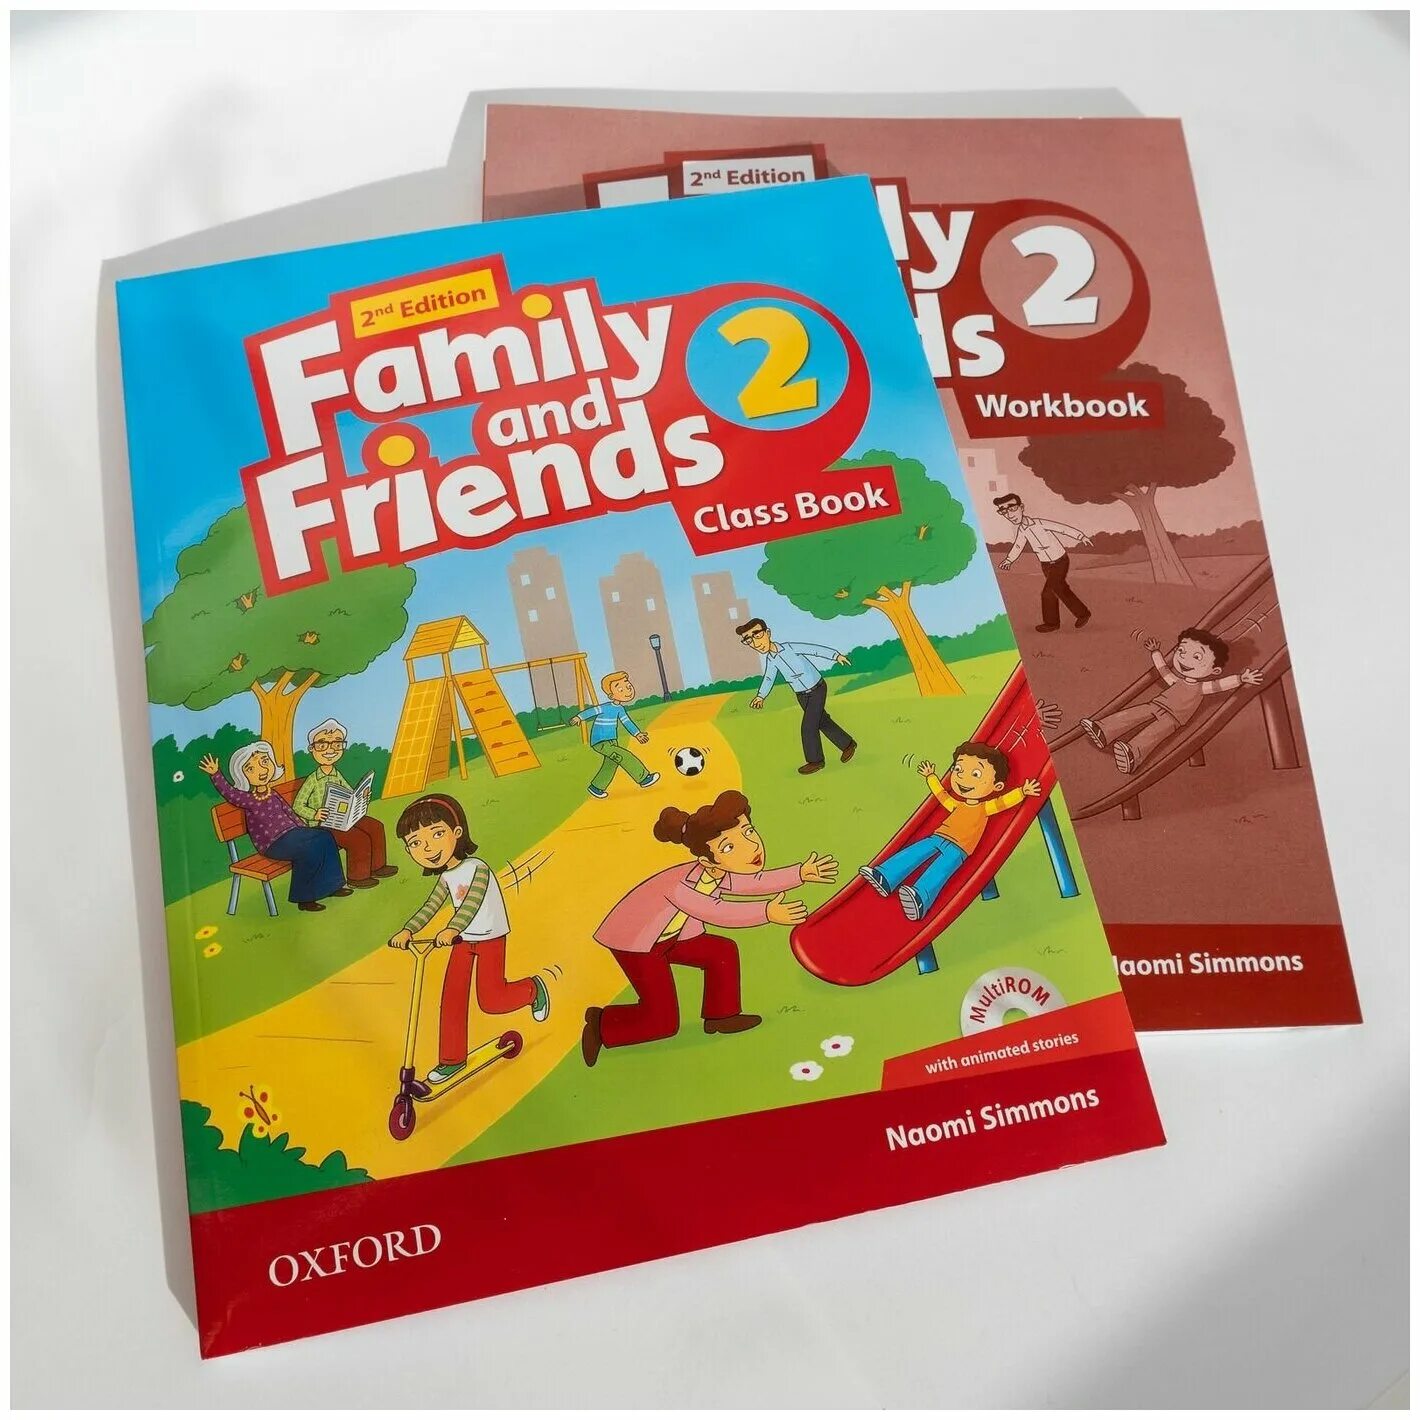 Family and friends 4 2nd edition workbook. Английский Family and friends 2 class book. Фэмили энд френдс 2 воркбук. Family and friends Edition 2 Workbook. Учебник по английскому языку Family and friends 2.